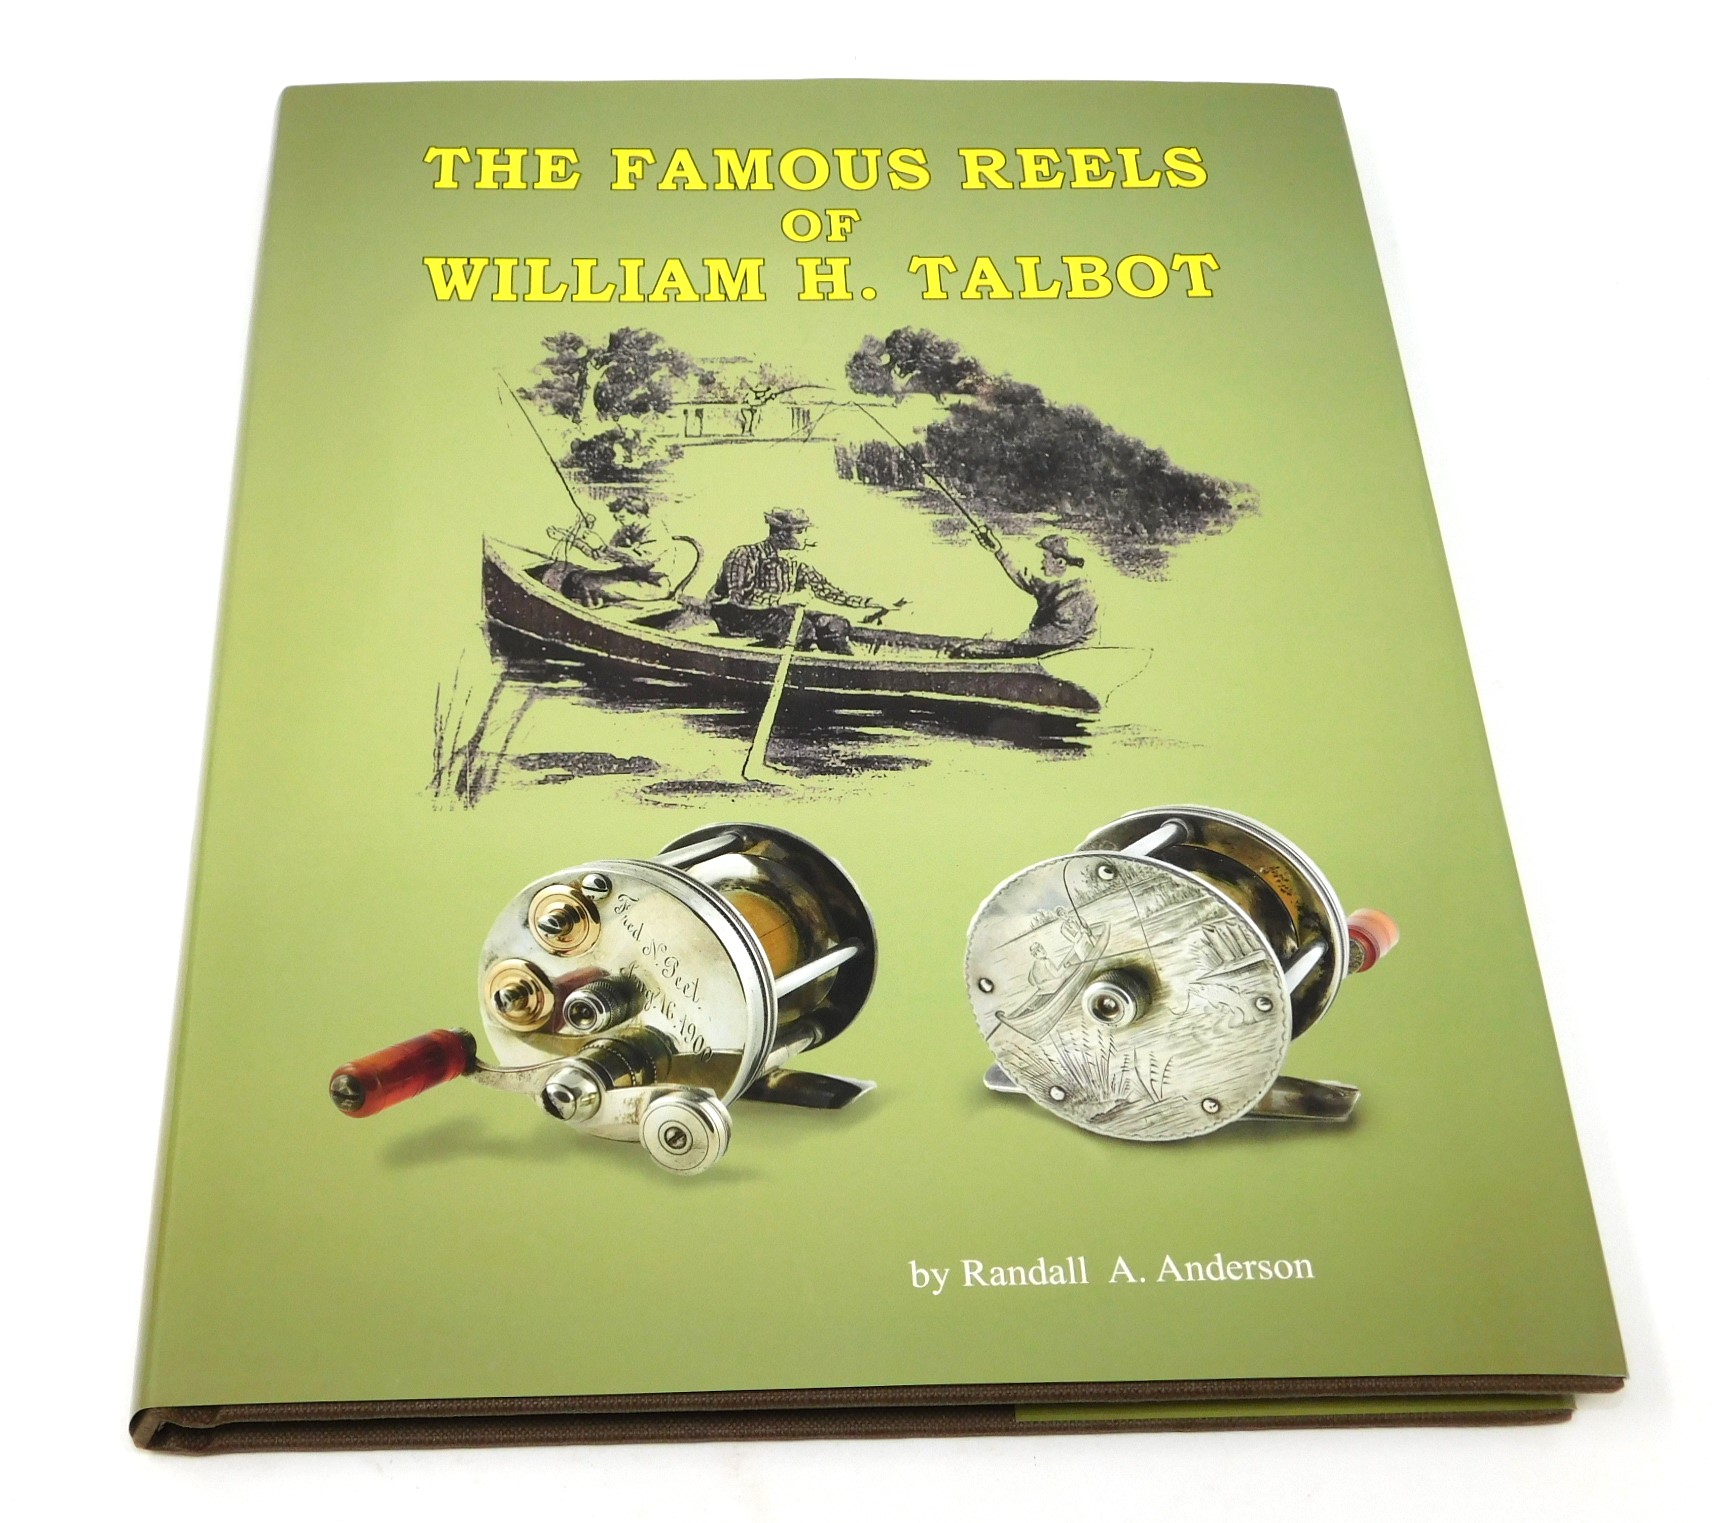 Talbot Book For Sale - Reel Talk - ORCA